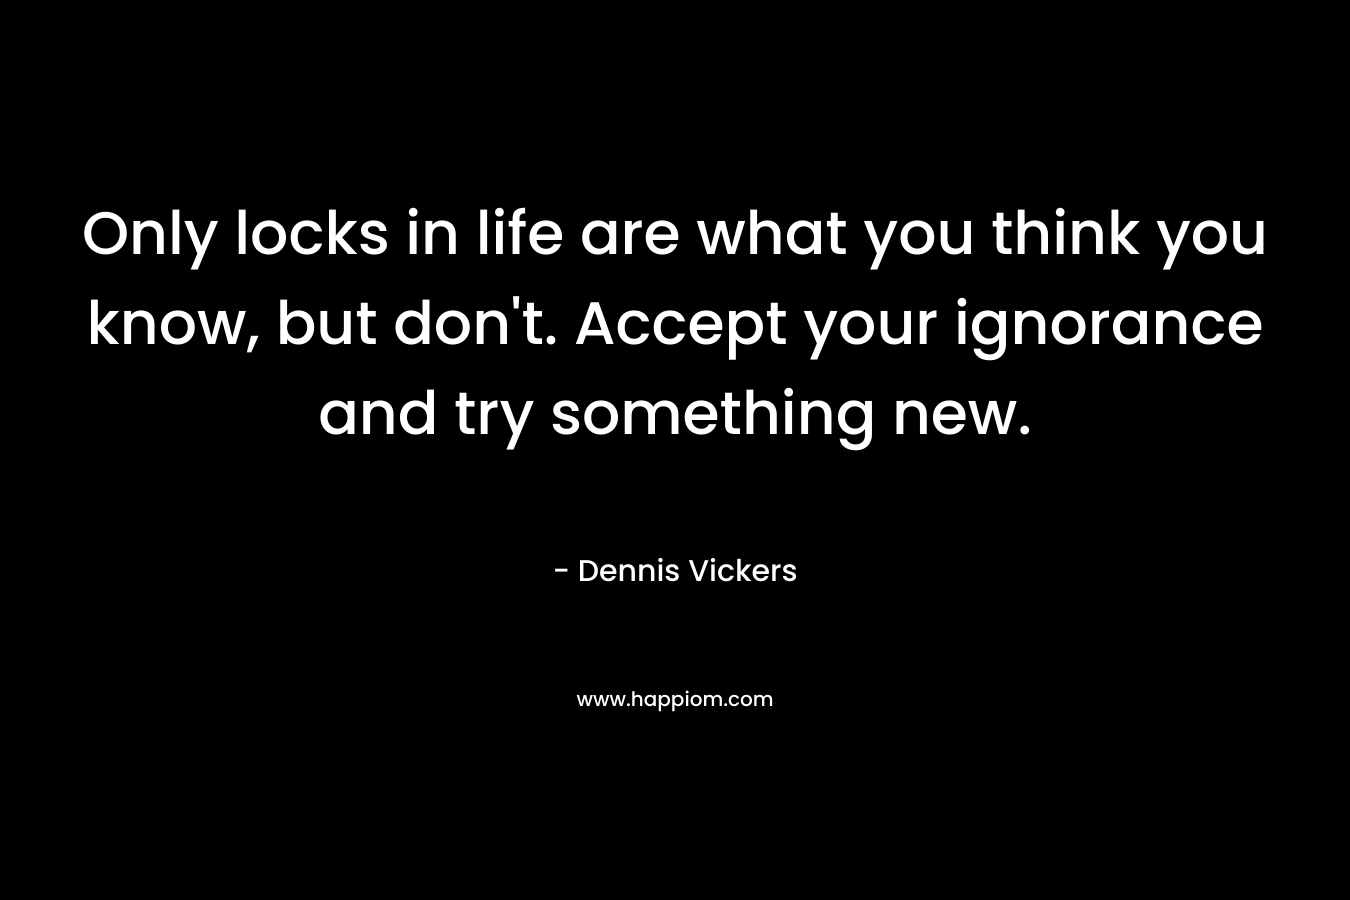 Only locks in life are what you think you know, but don’t. Accept your ignorance and try something new. – Dennis Vickers